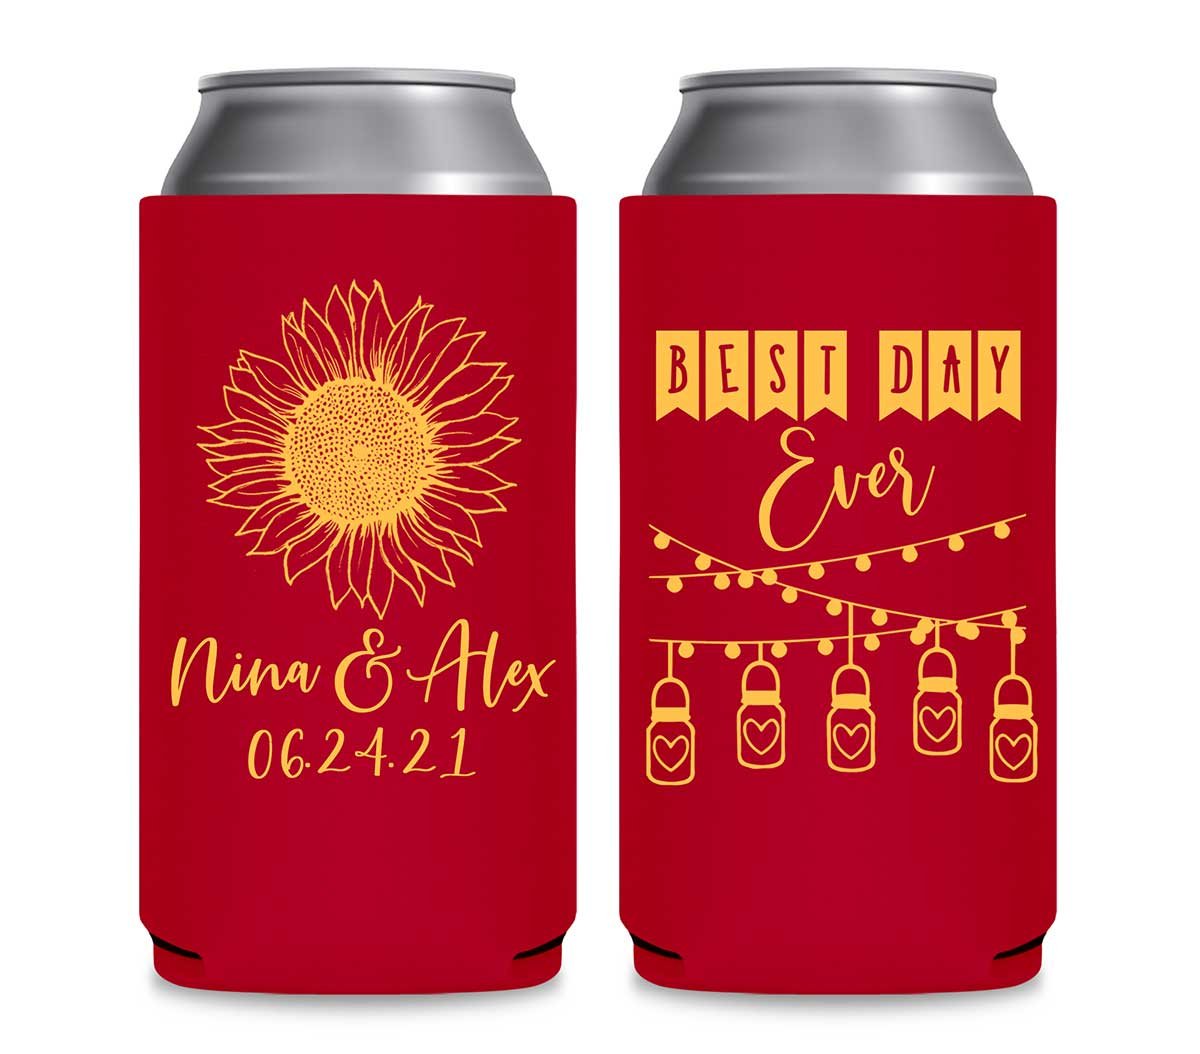 Country Sunflower 1A Best Day Ever Foldable 12 oz Slim Can Koozies Wedding Gifts for Guests